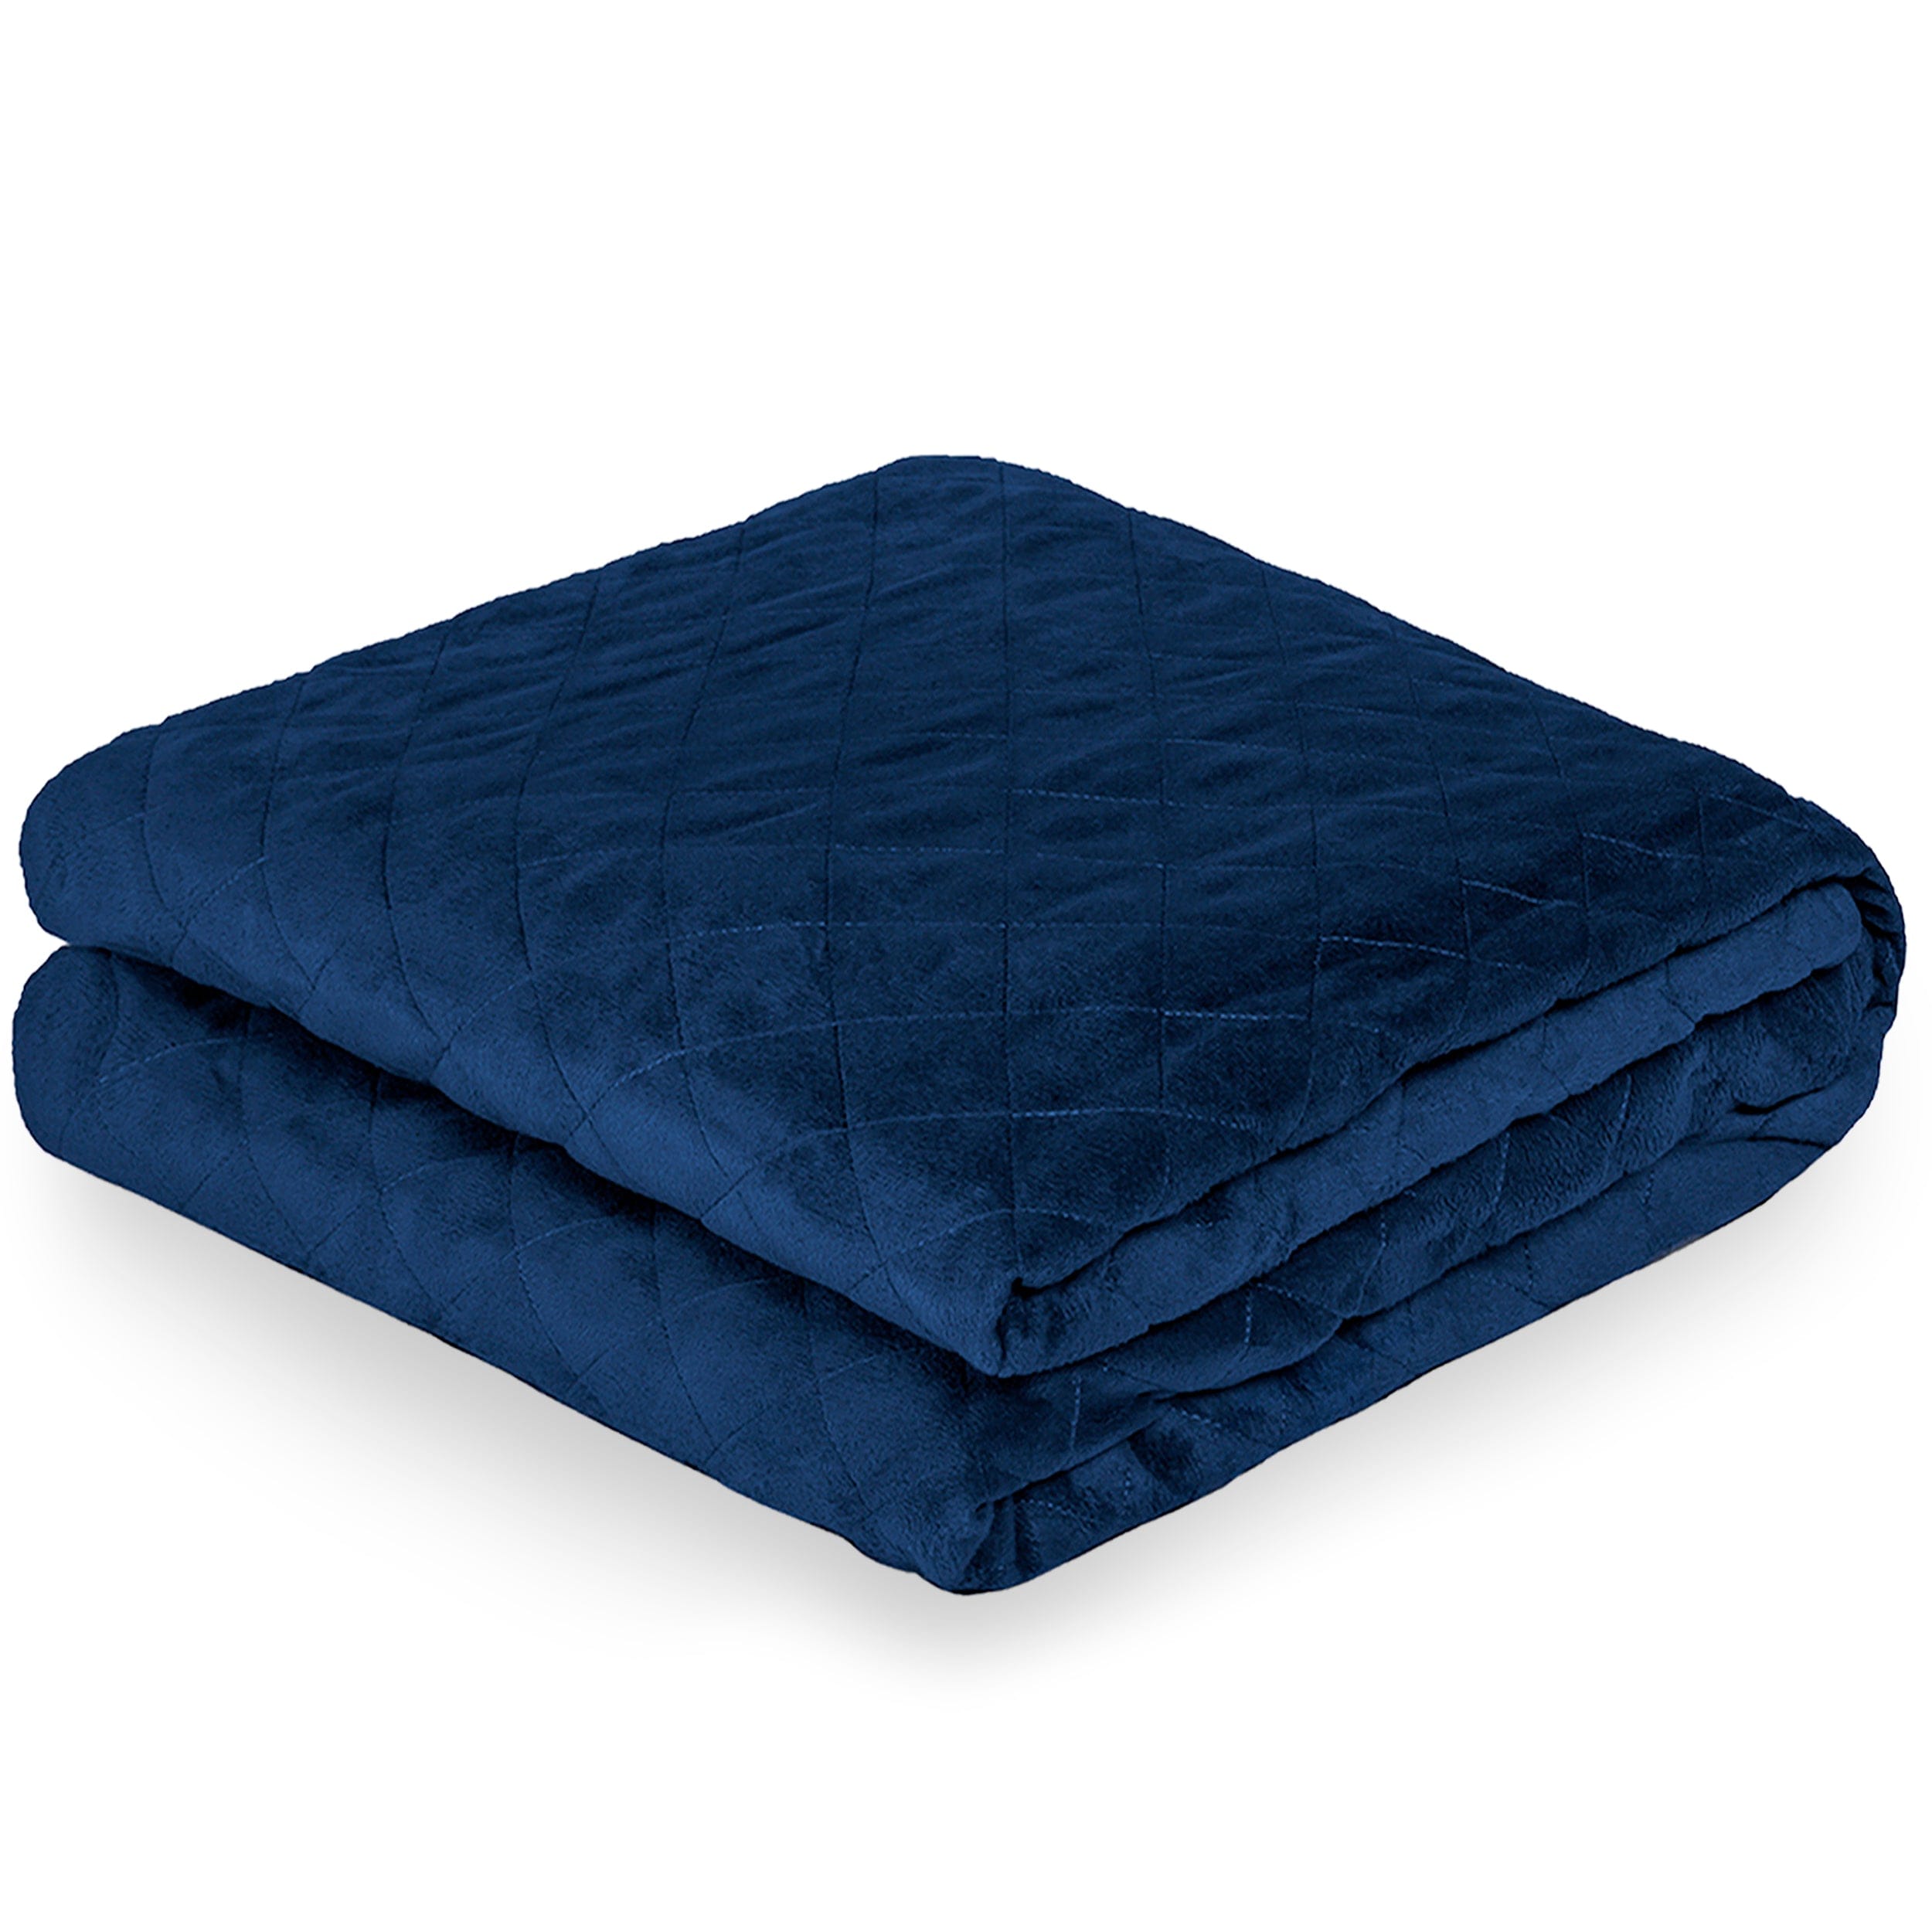 Dark blue weighted blanket cover folded neatly in a square